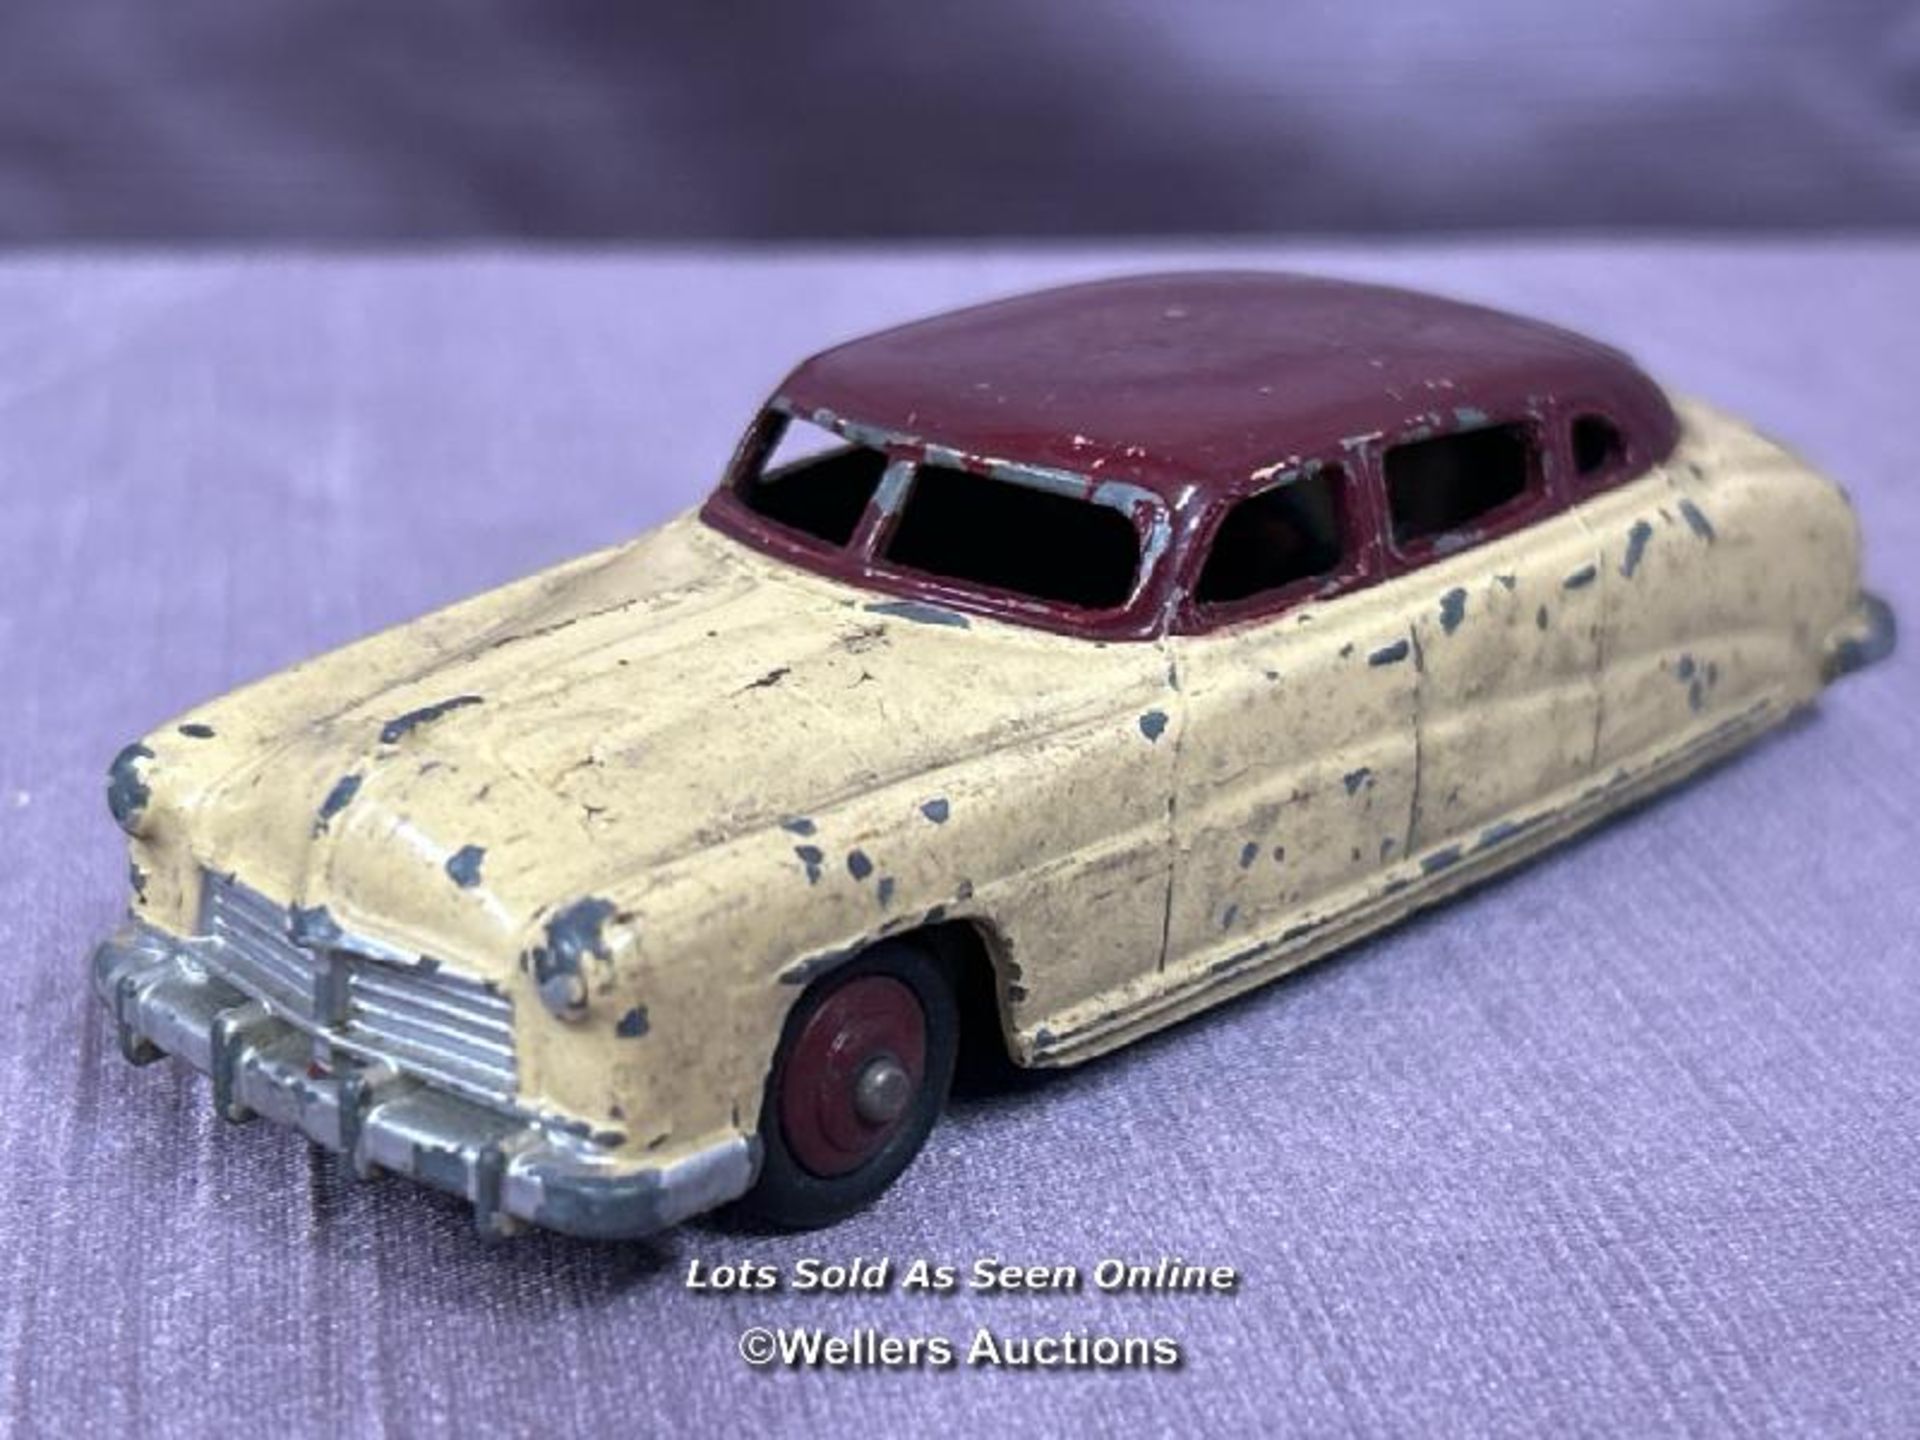 TWO DINKY HUDSON SEDAN DIE CAST CARS, ONE BLUE AND ONE CREAM - Image 2 of 5